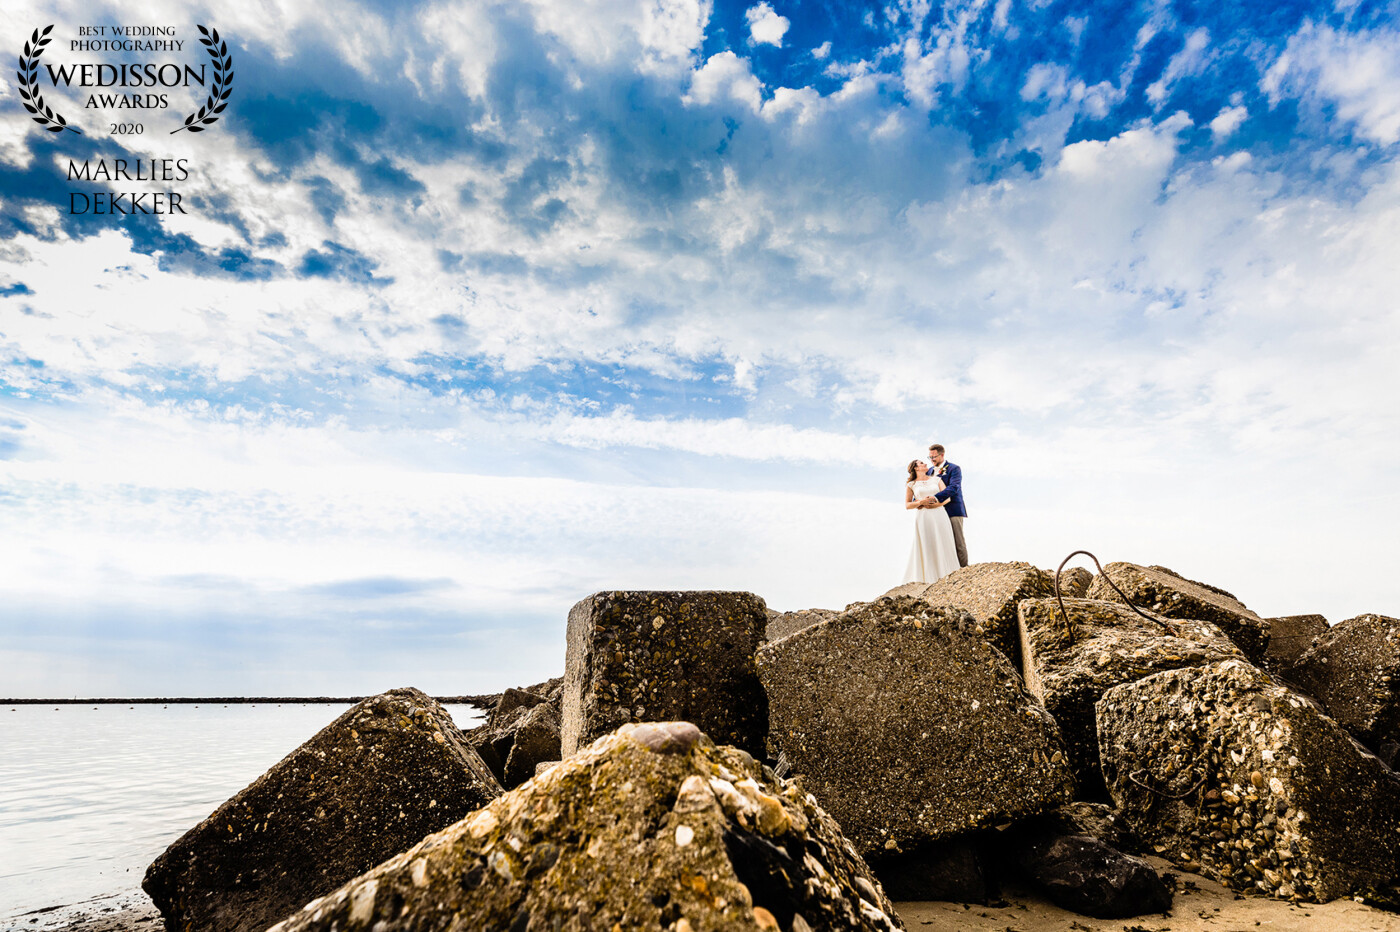 This lovely couple married at the beach. We did a short shoot after their wedding ceremony. We climbed these blocks to make this beautiful picture with these awesome clouds. It was a steep climb for both so I loved the brave nature of the couple, otherwise, I could not make this lovely shot.